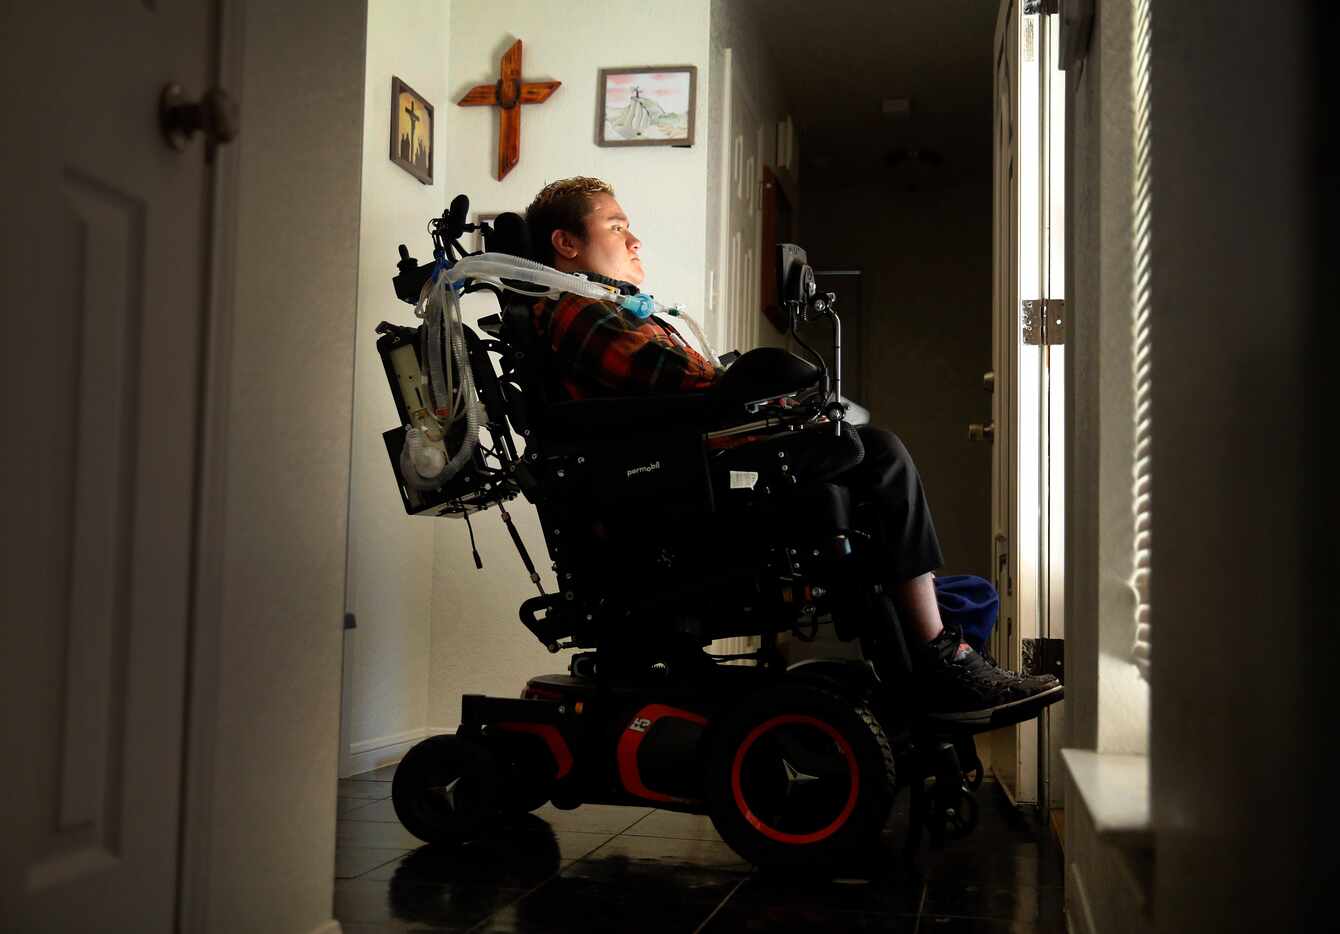 Zak Farquer is a former foster child who is confined to a motorized chair and paralyzed...